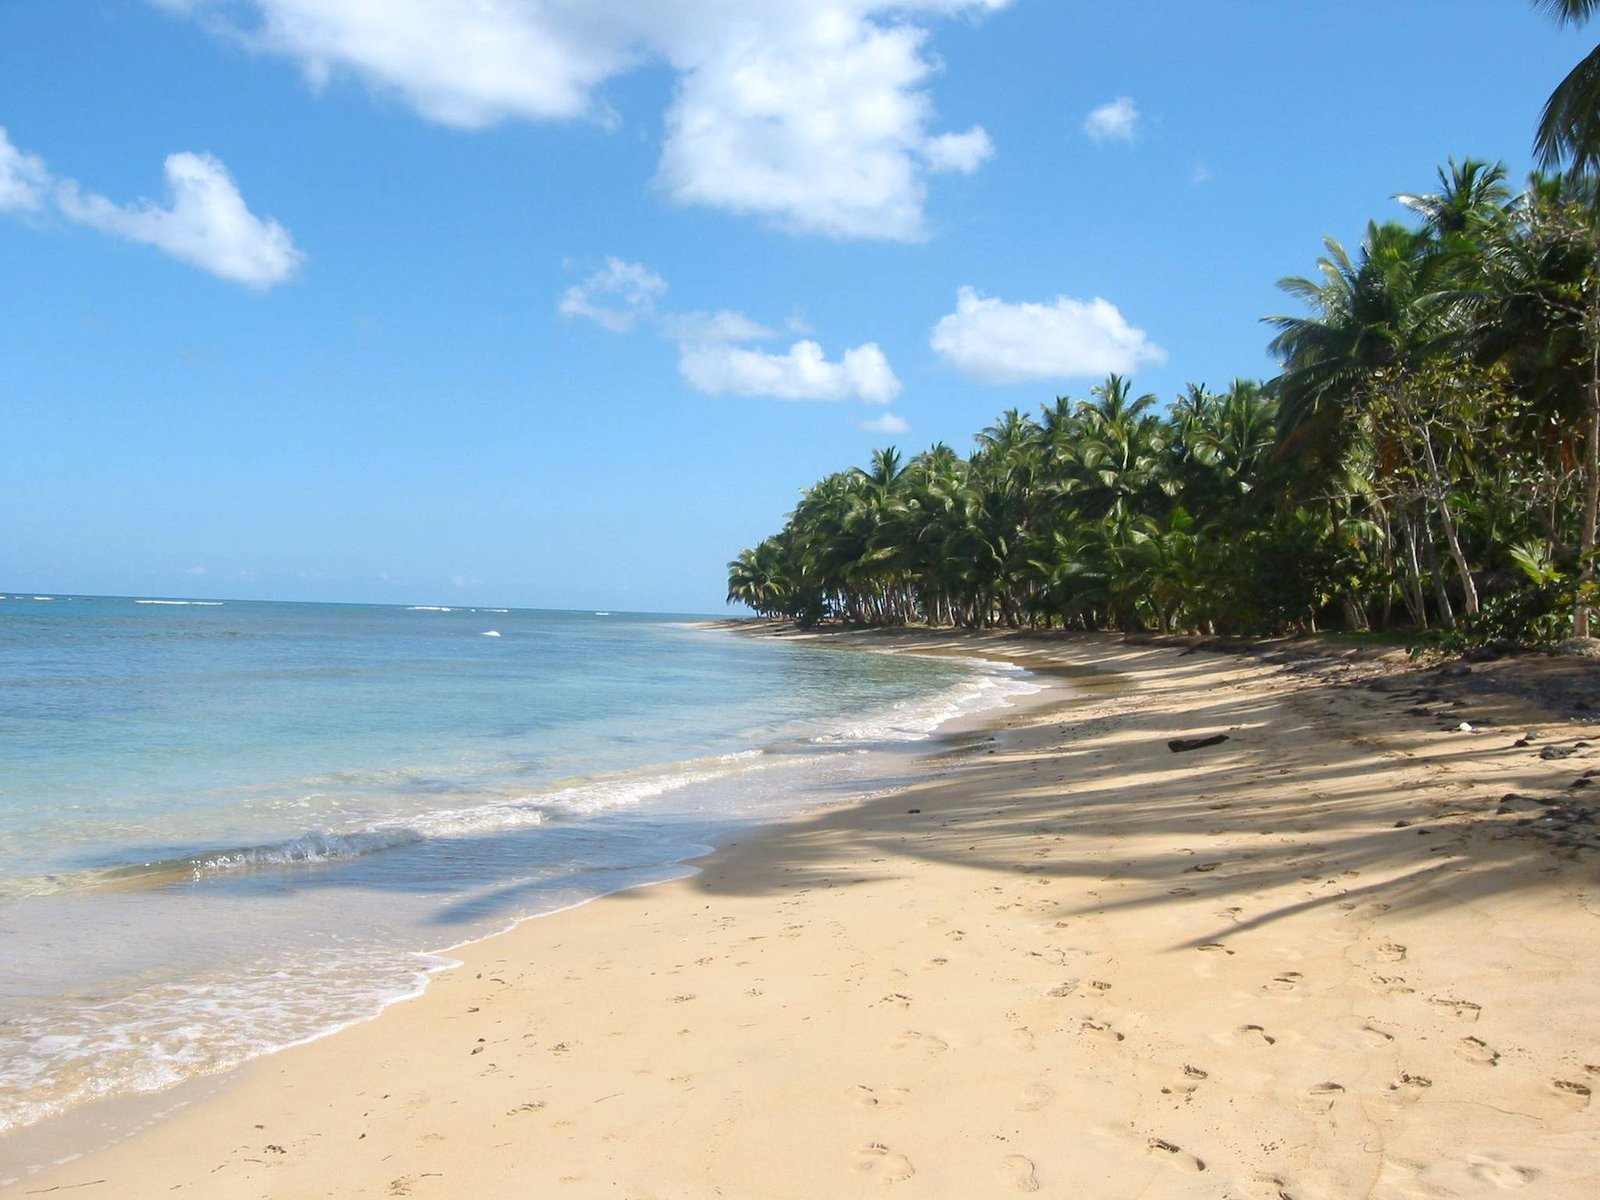 the beach is littered with palm trees and waves